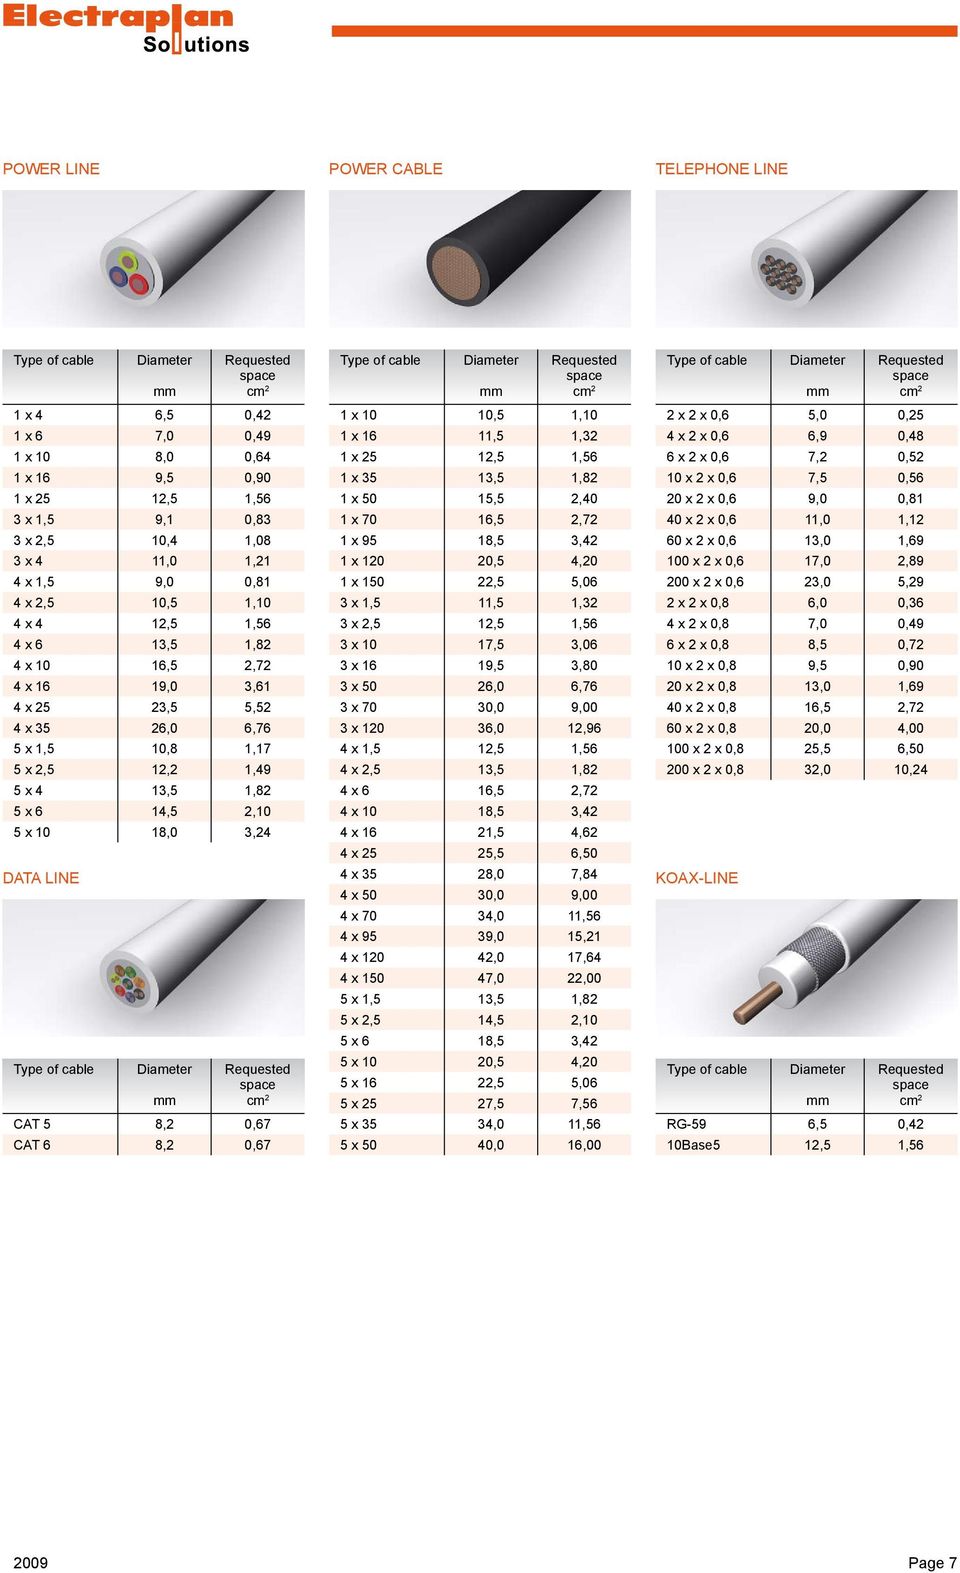 1,82 5 x 6 14,5 2,10 5 x 10 18,0 3,24 DATA LINE Type of cable Diameter mm Requested space cm 2 CAT 5 8,2 0,67 CAT 6 8,2 0,67 Type of cable Diameter mm Requested space cm 2 1 x 10 10,5 1,10 1 x 16